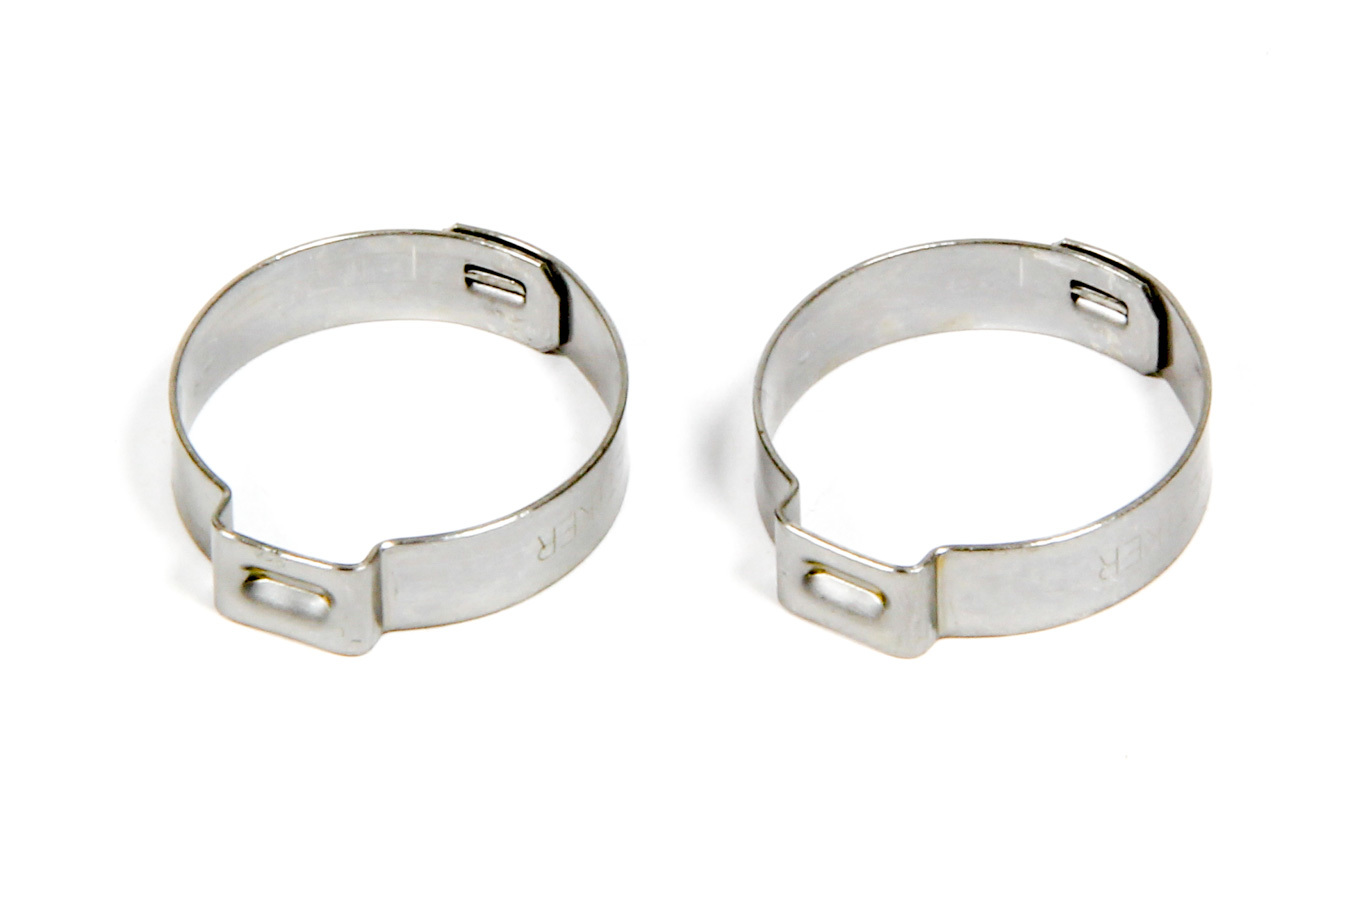 Fragola 999160 Hose Clamp, Band, Push Lock Clamp, 10 AN, Stainless, Natural, Pair